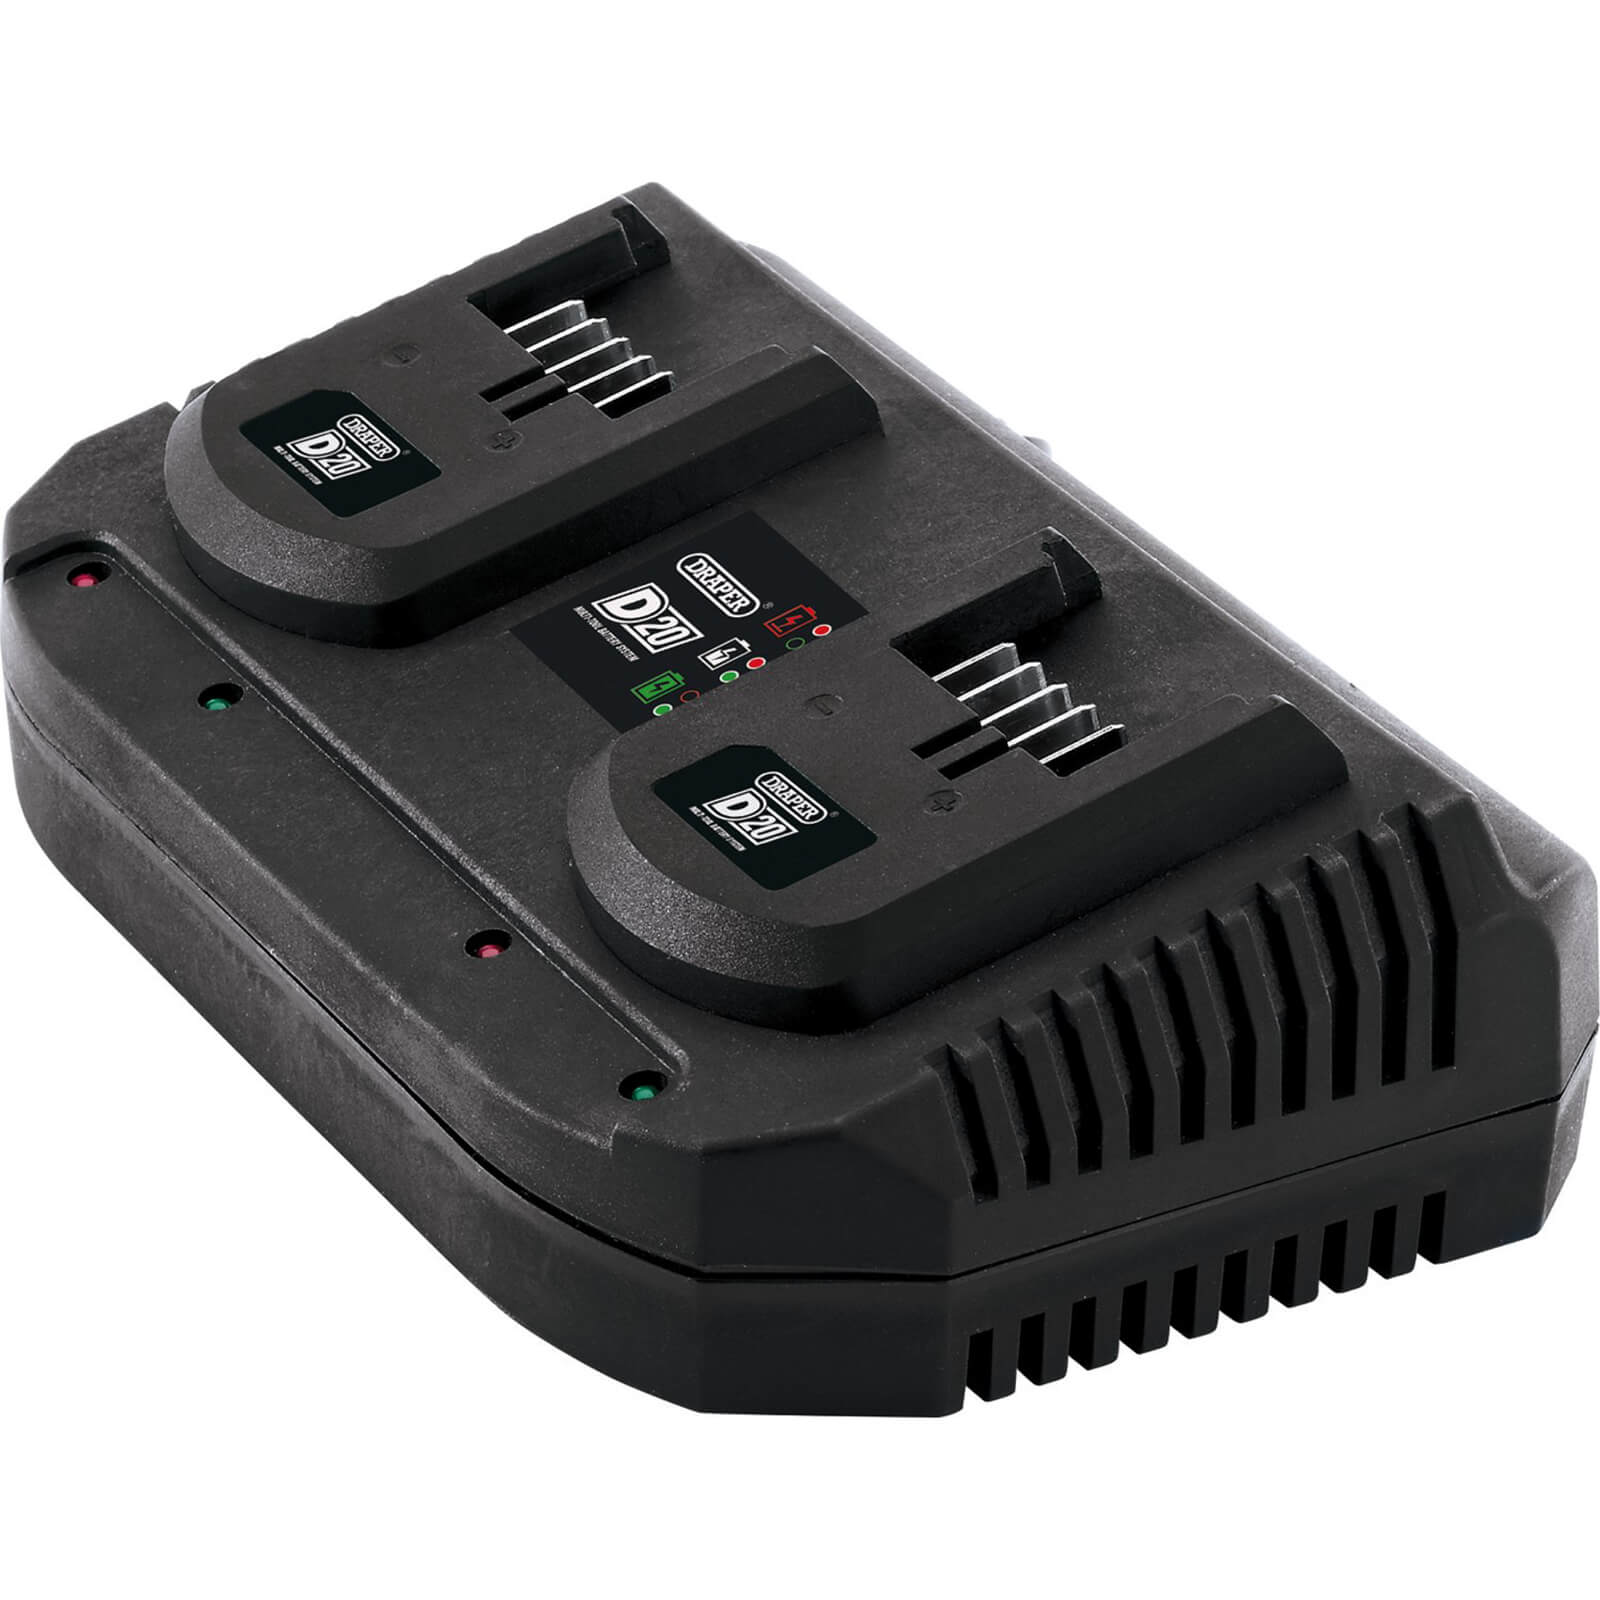 Photos - Power Tool Battery Draper D20TBCF 20v D20 Twin Battery Charger 240v 92239 